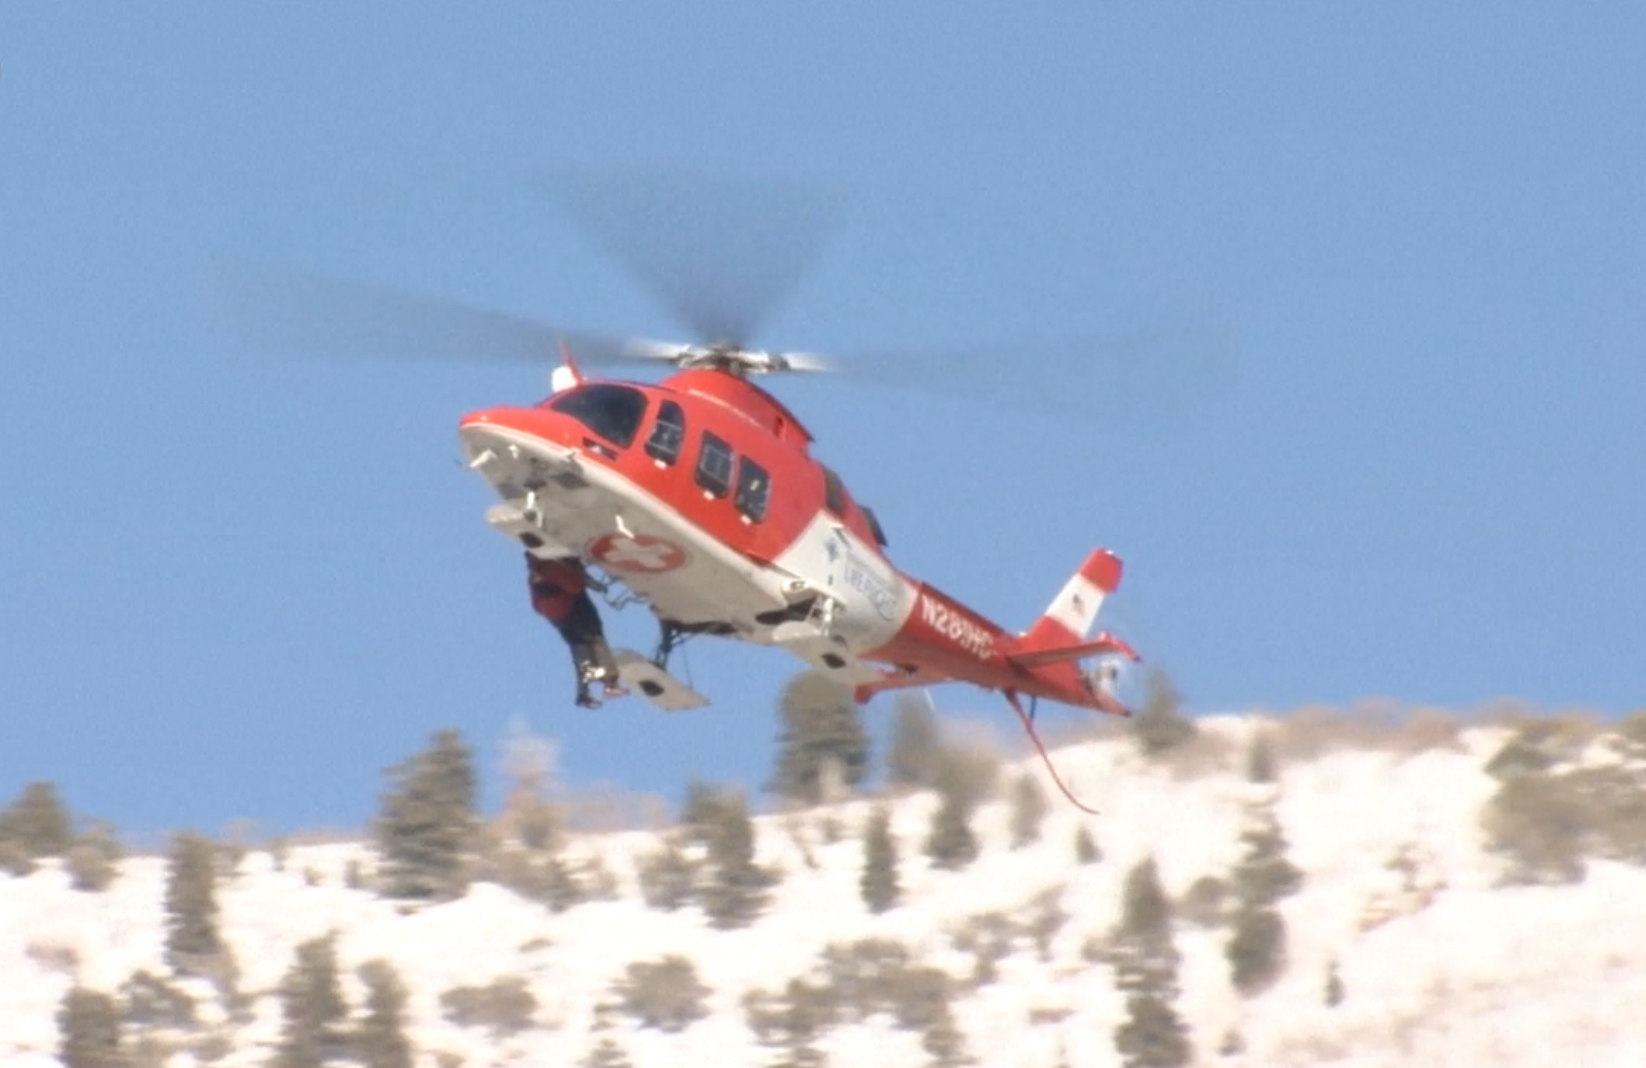 PHOTO: Four skiers were killed and four others rescued after an avalanche in Utah's Salt Lake Valley on Saturday, Feb. 6, 2021.